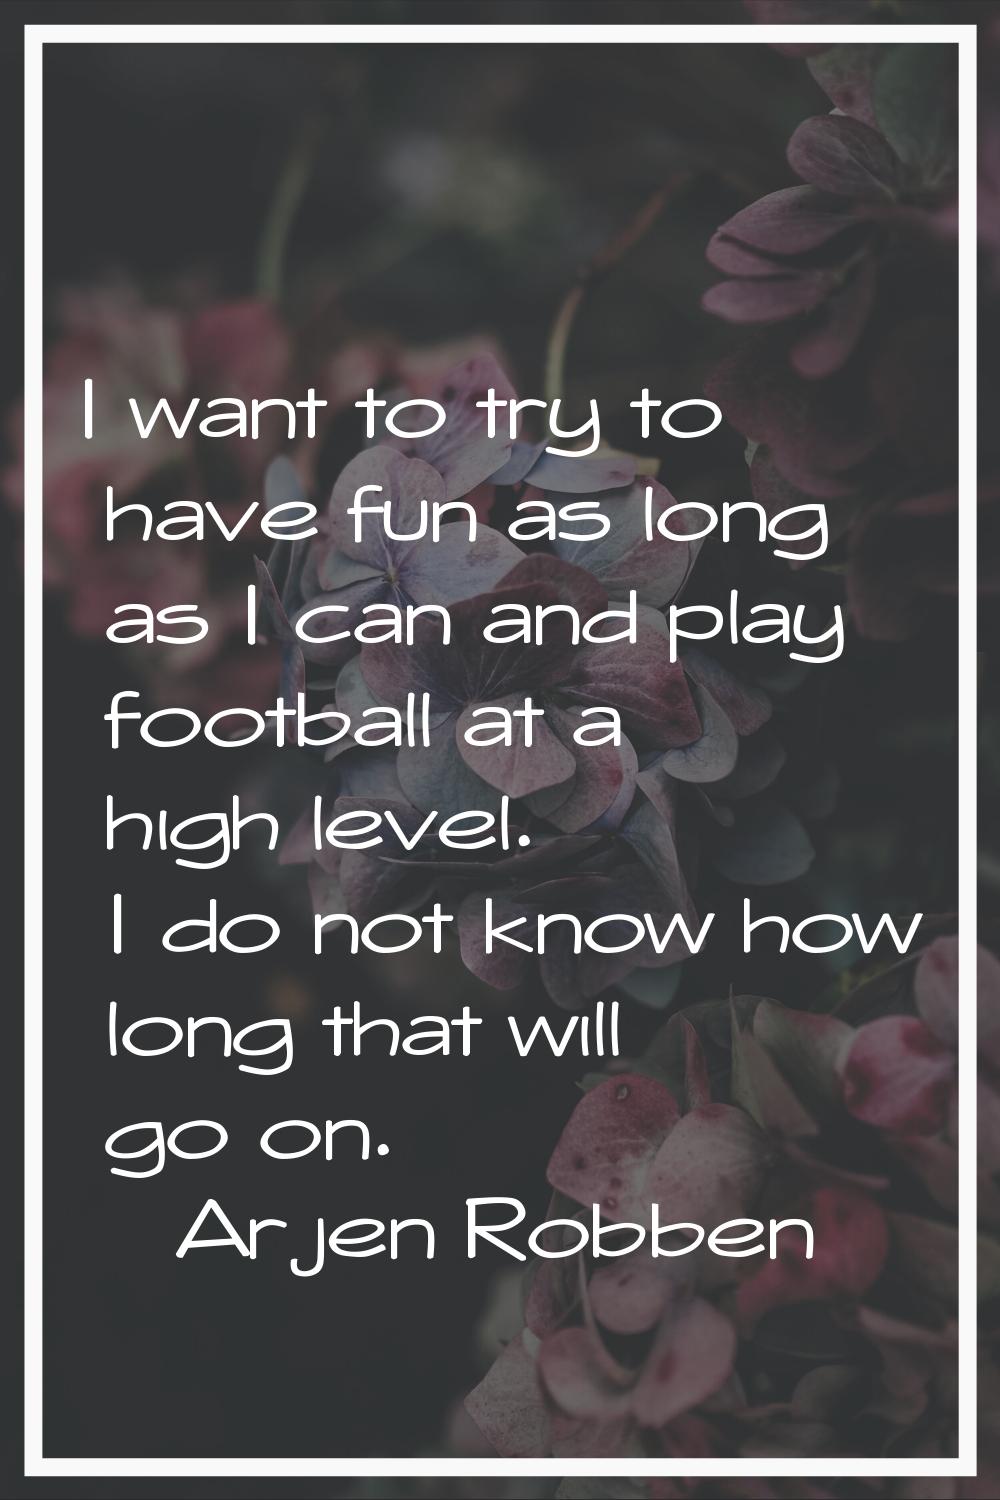 I want to try to have fun as long as I can and play football at a high level. I do not know how lon